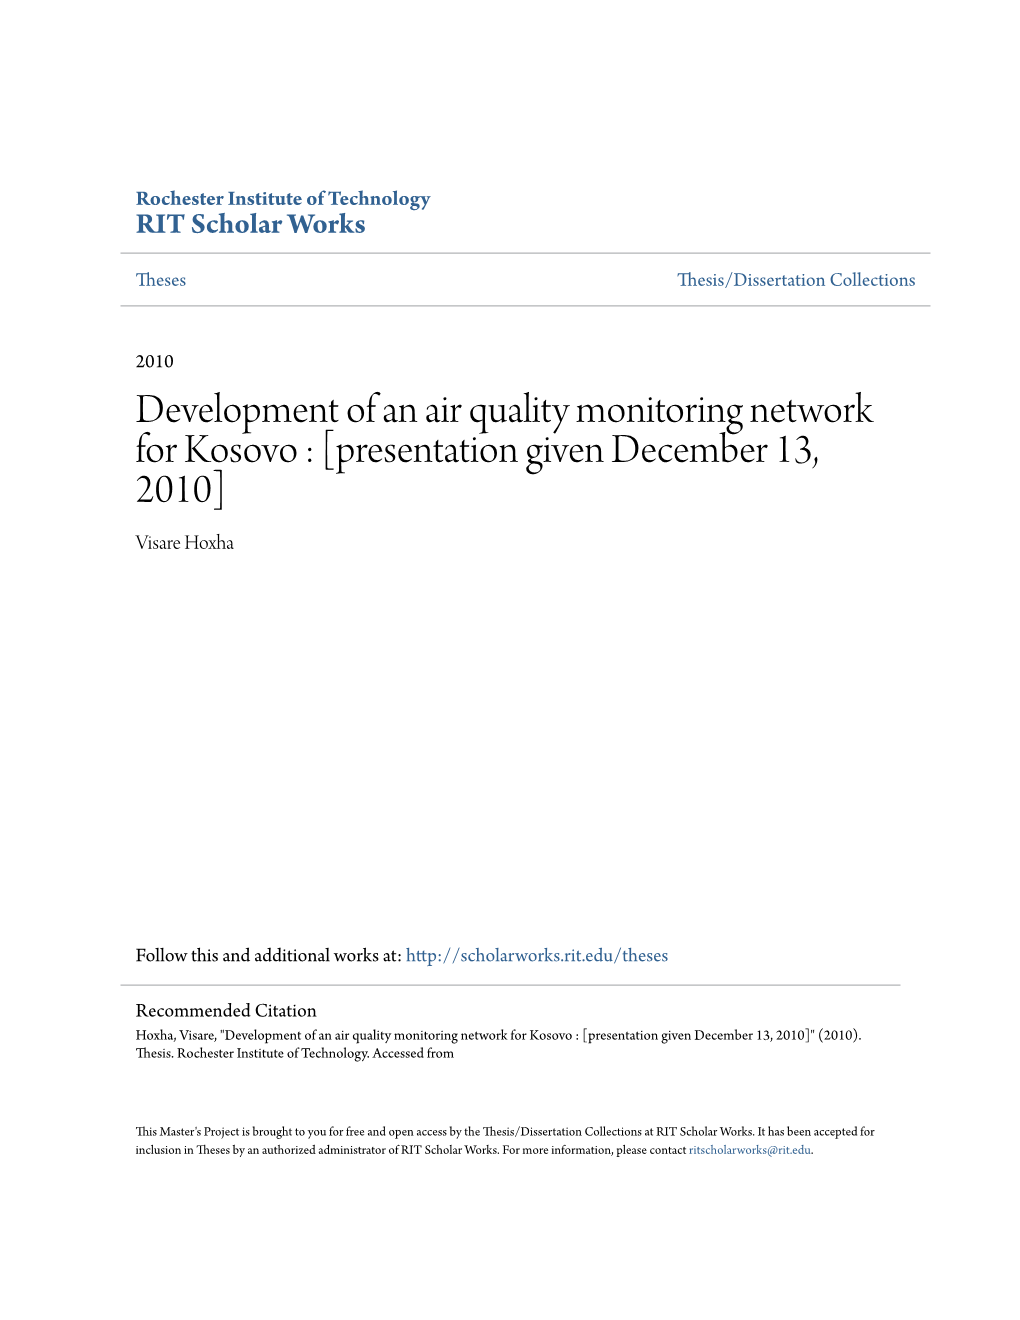 Development of an Air Quality Monitoring Network for Kosovo : [Presentation Given December 13, 2010] Visare Hoxha